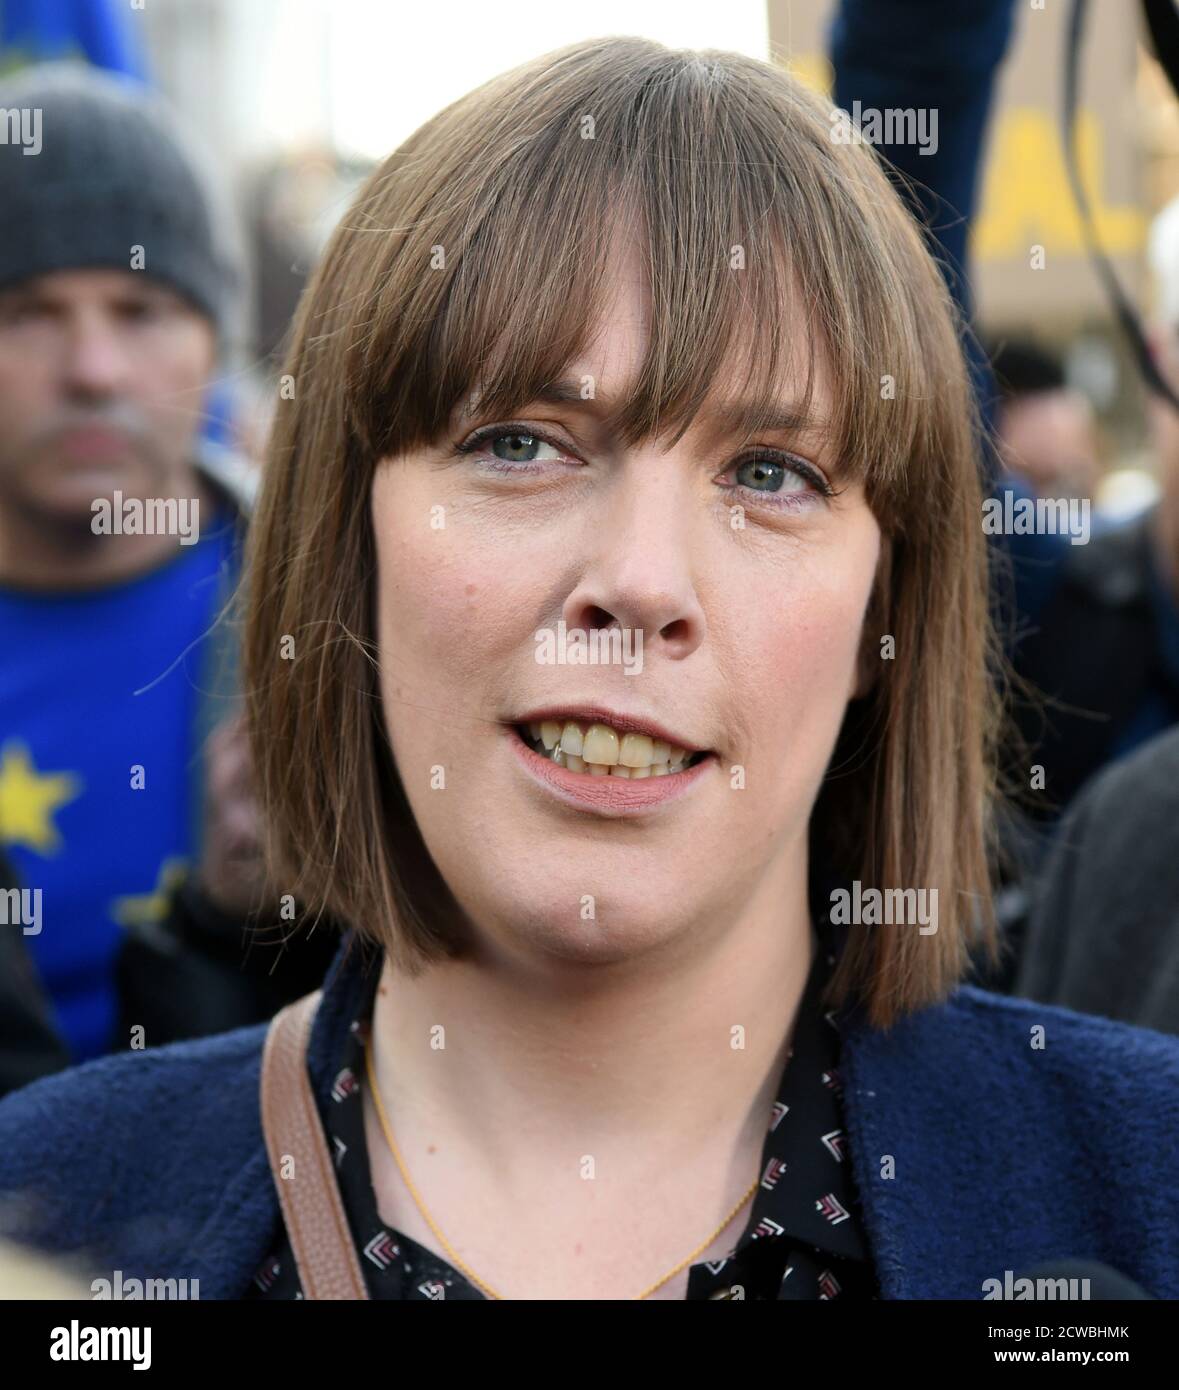 Photograph of Jess Philips speaking at a Pro-Remain march. Jessica Rose Phillips (1981-) a British Labour Party politician. She has served as the Member of Parliament for Birmingham Yardley since the 2015 general election. Stock Photo